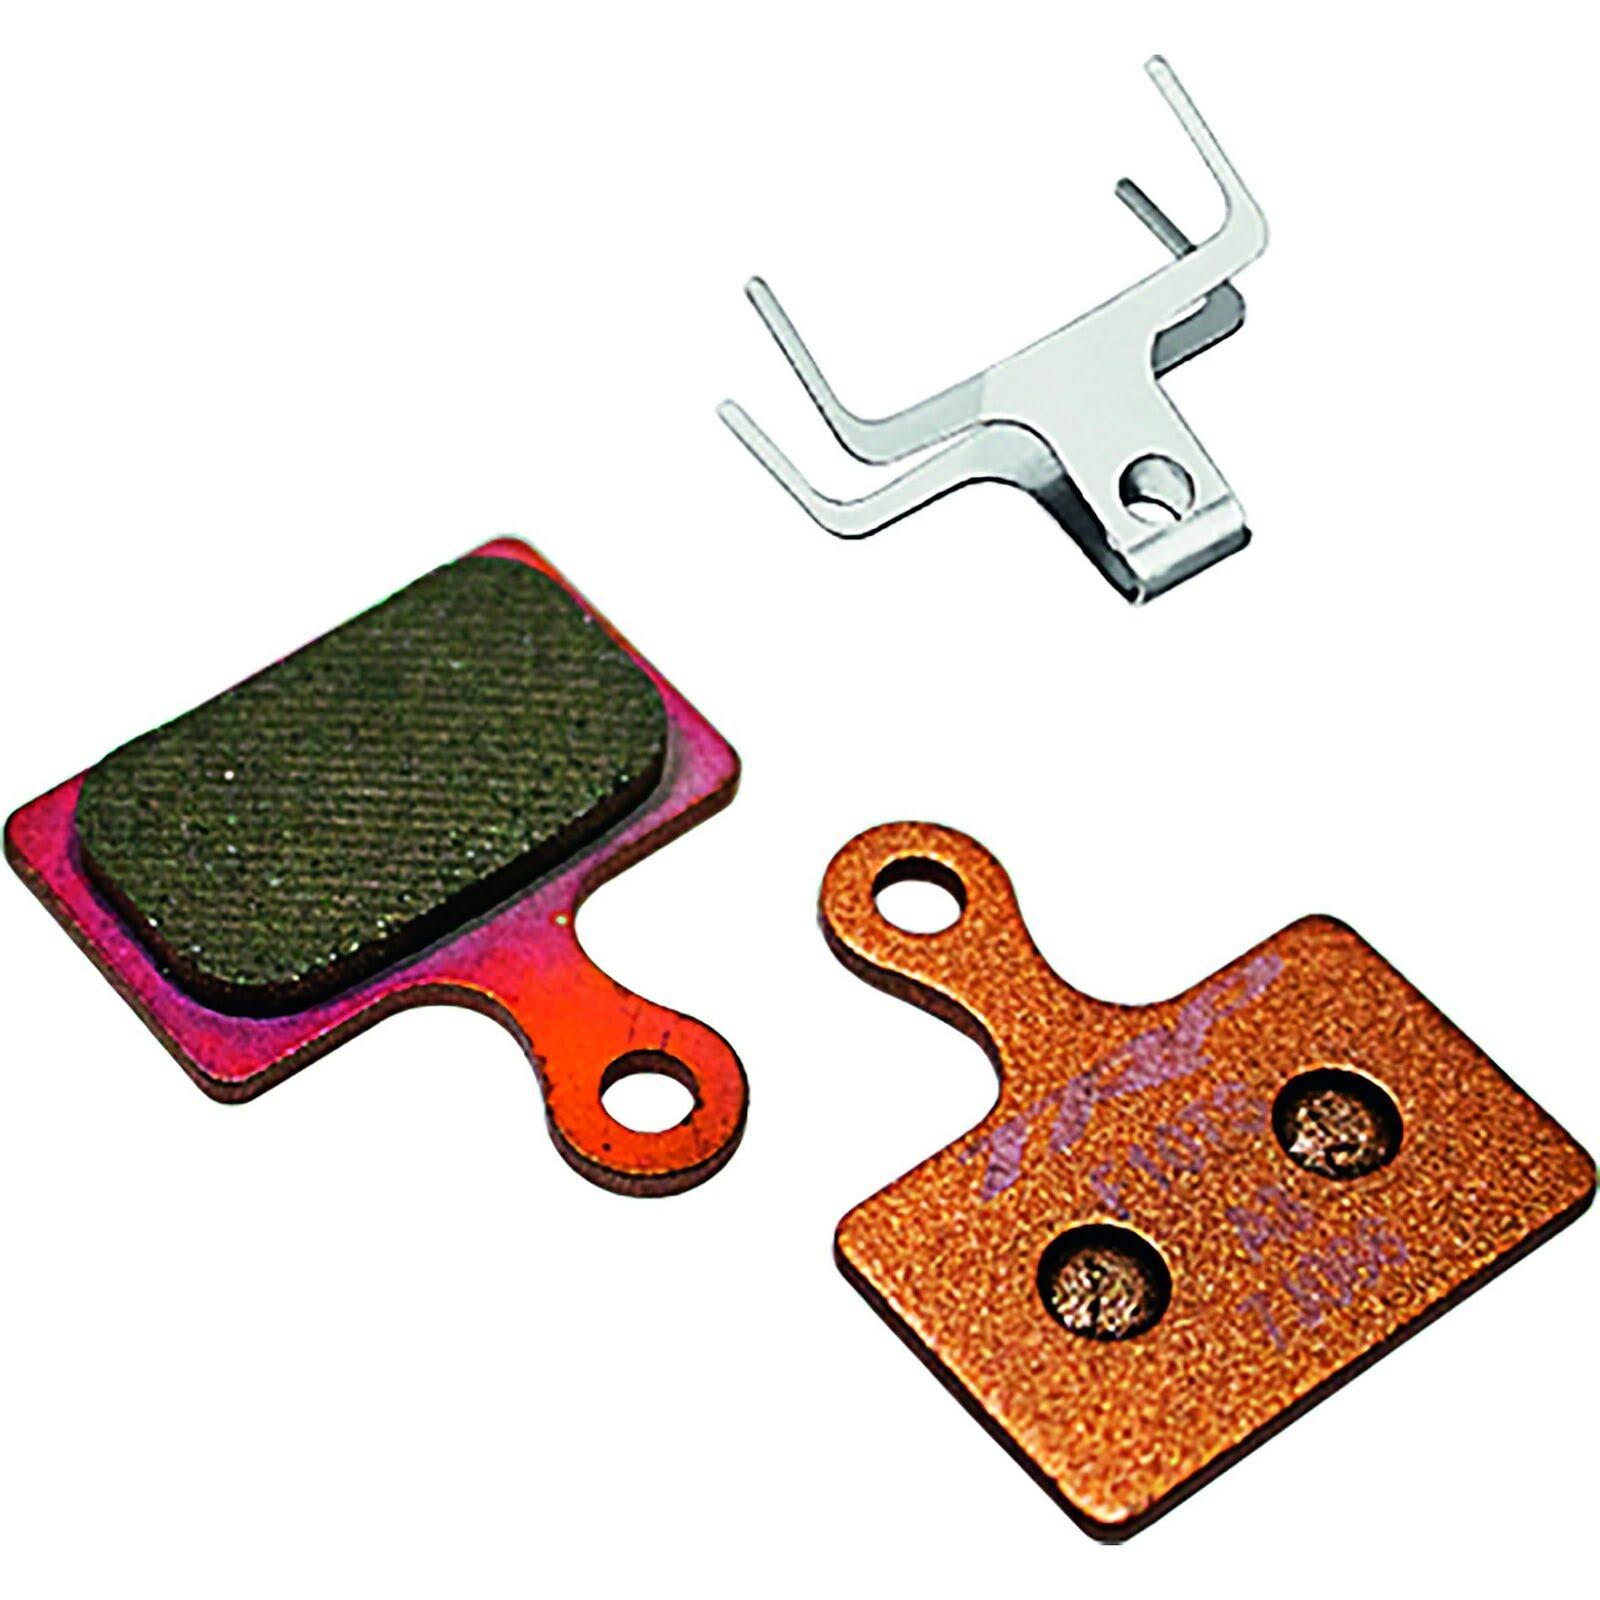 TRP Disc Brake Pads for Hylex hylex RS and HD-T190 Flat-Mount Calipers